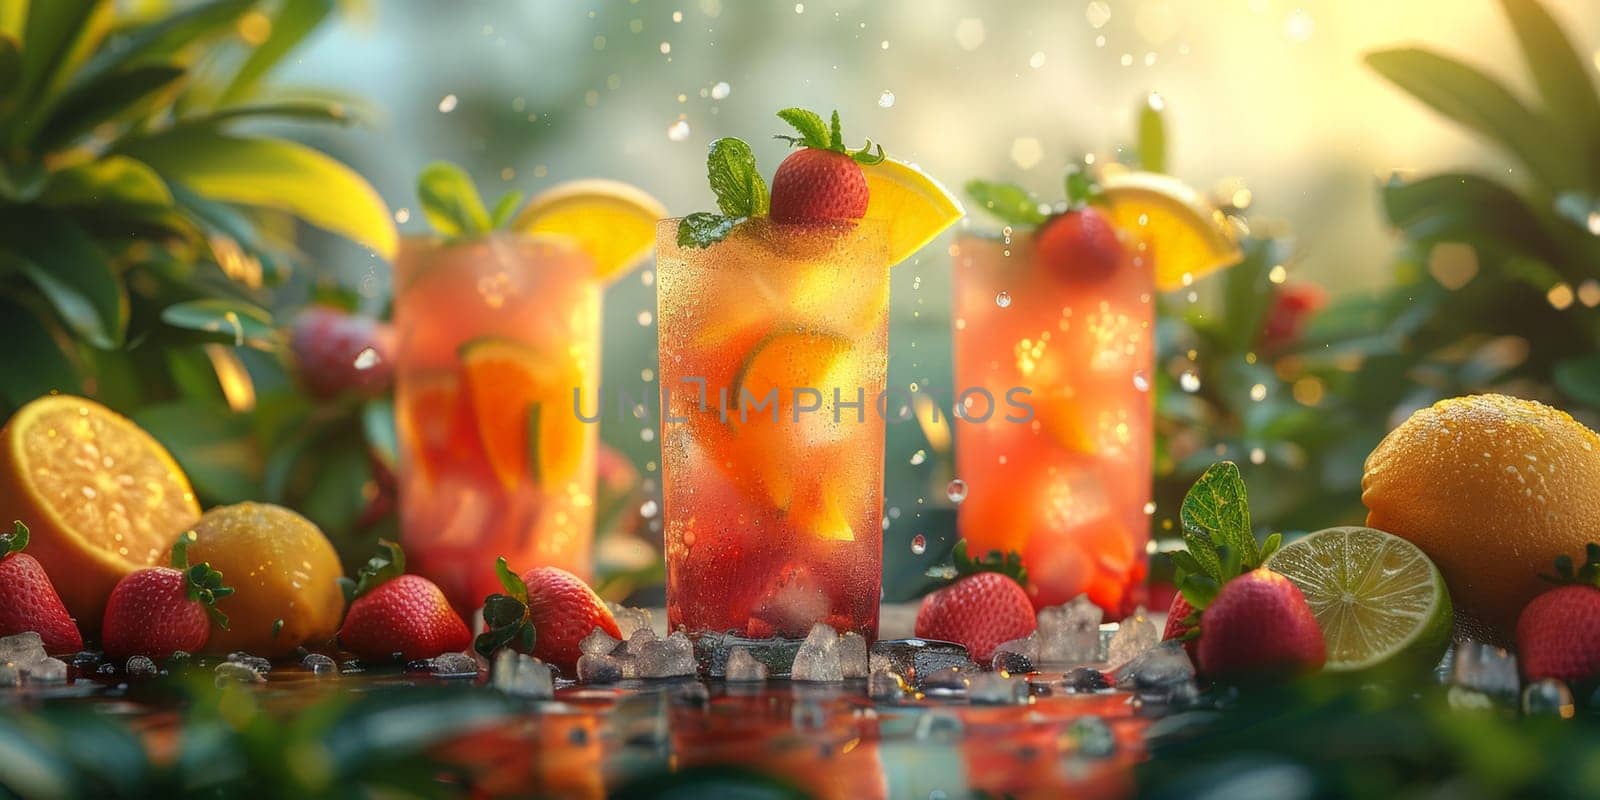 A colorful drink with strawberries, oranges, and limes is displayed on a table. The drink is served in three different glasses, each with a different fruit garnish